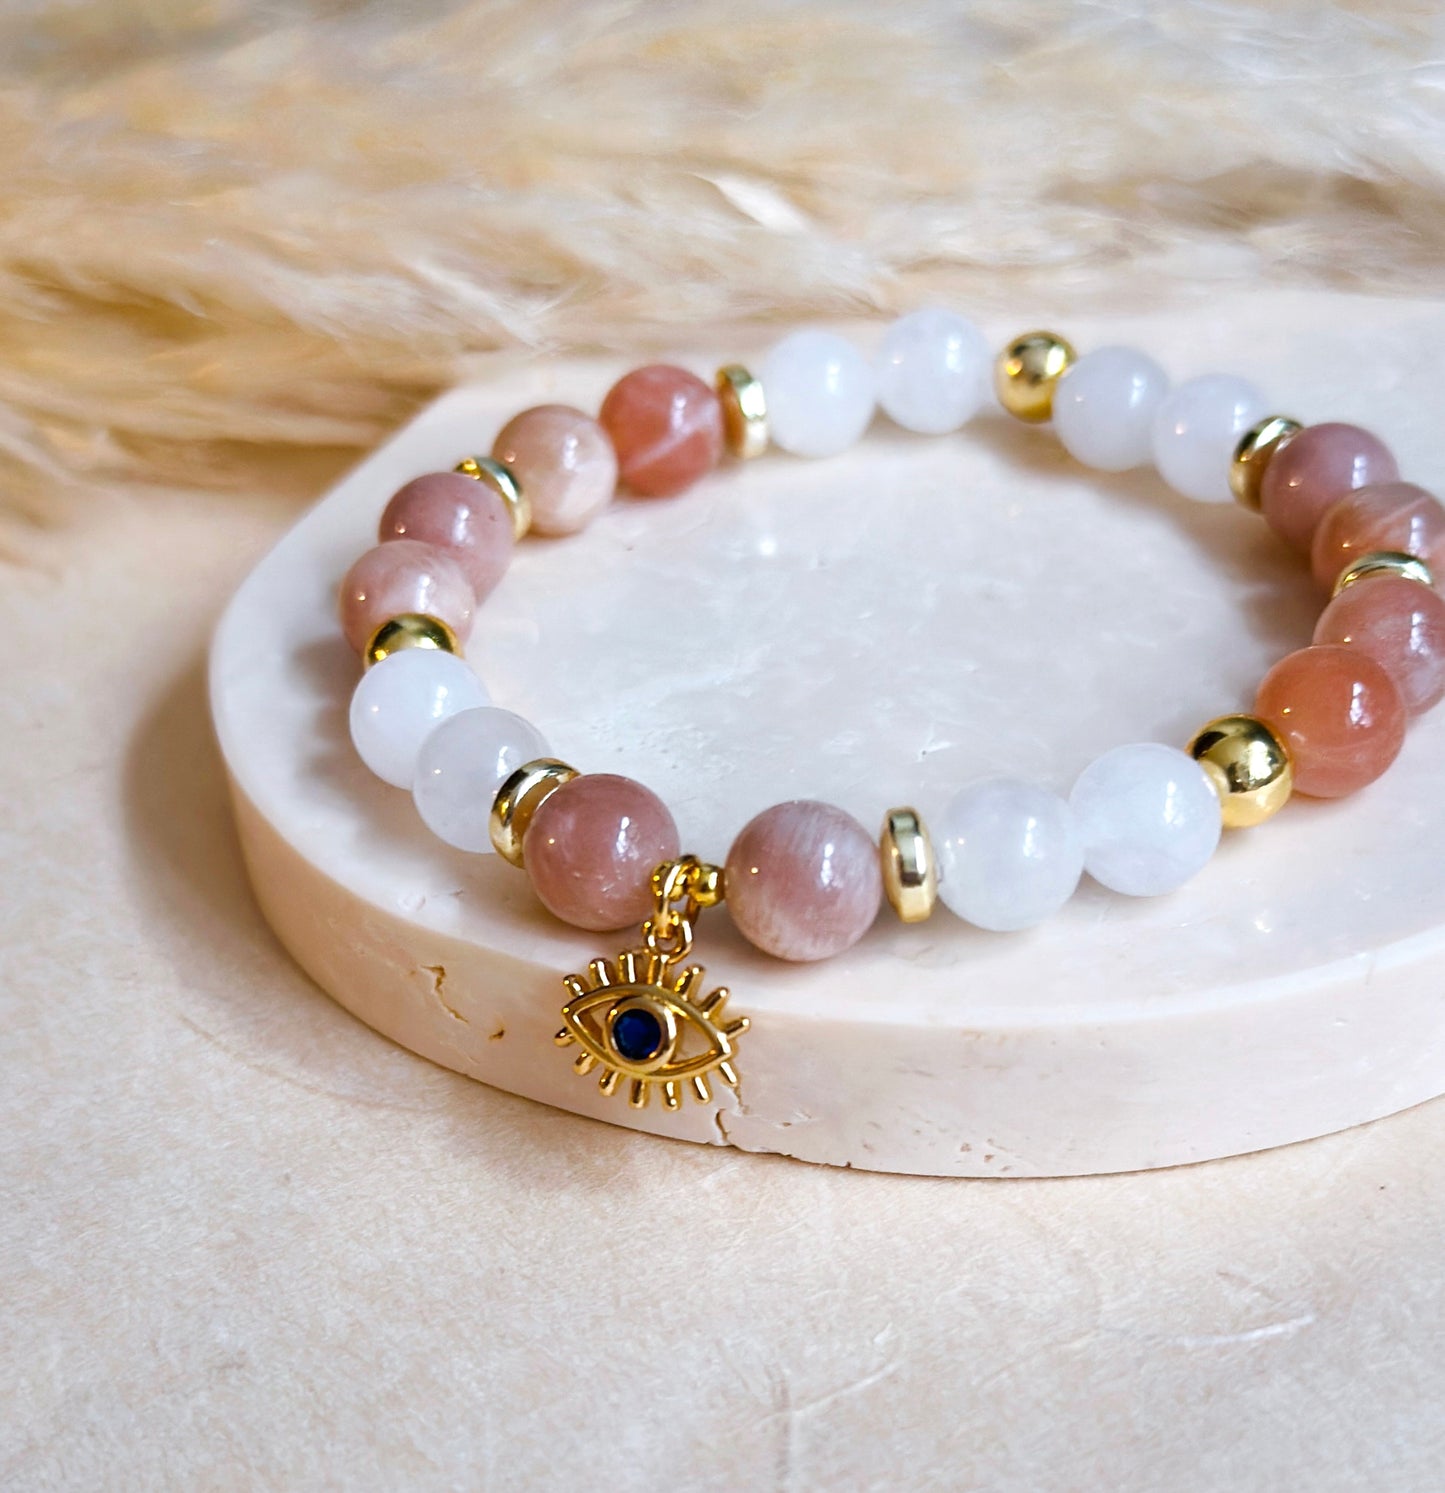 The “Elegant Guardian Bracelet" seamlessly weaves the healing properties of sunstone and white agate, accentuated by the watchful presence of an evil eye charm. 